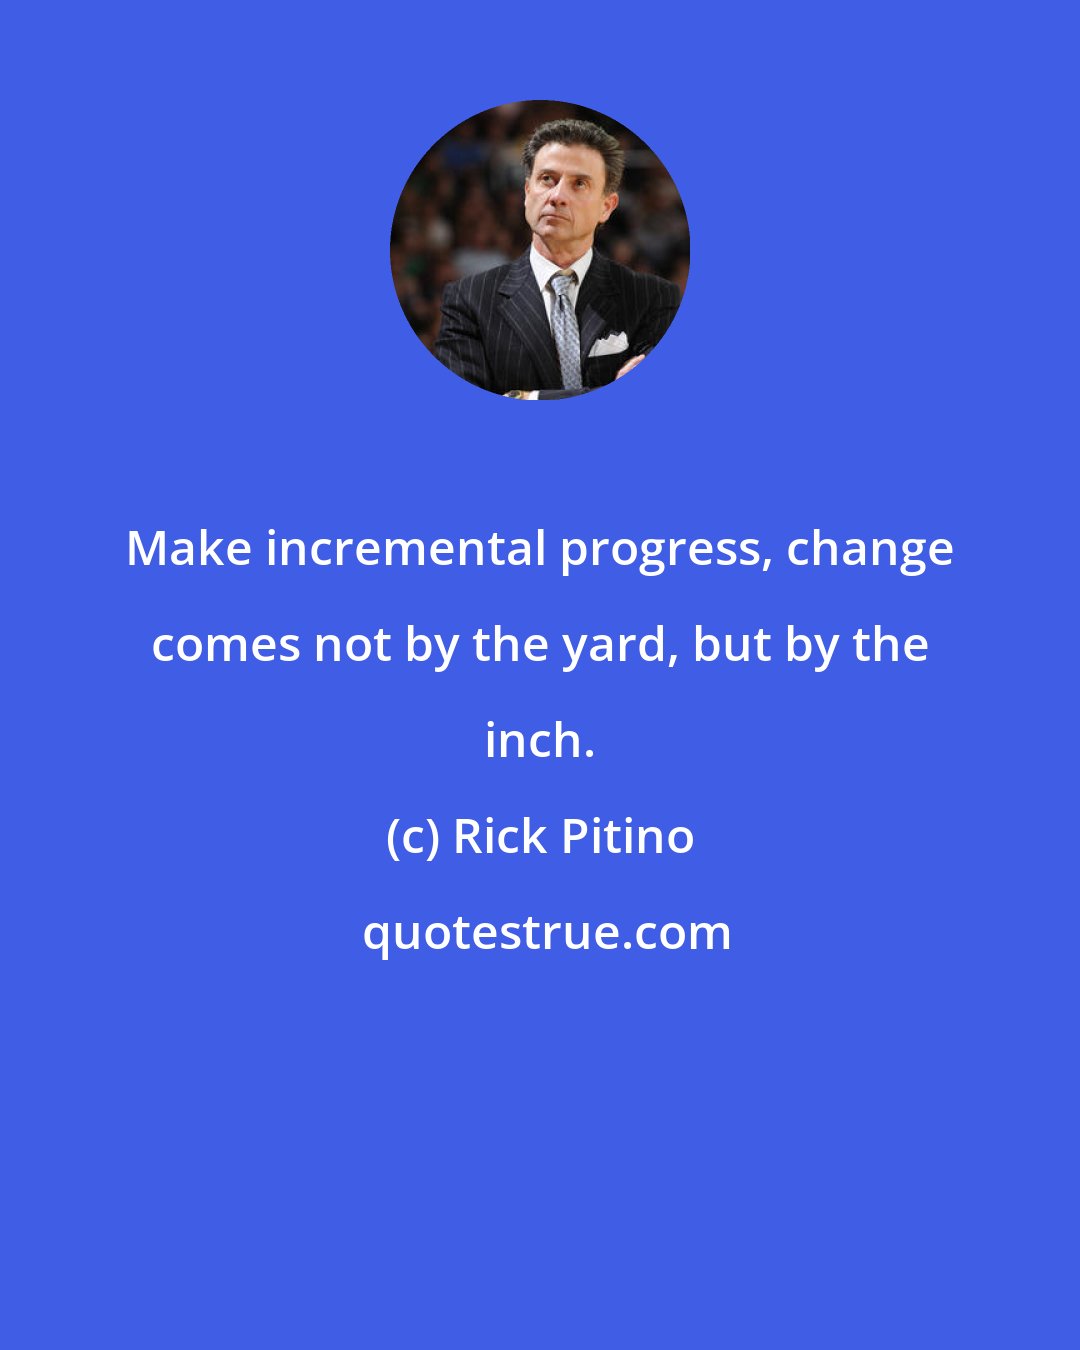 Rick Pitino: Make incremental progress, change comes not by the yard, but by the inch.